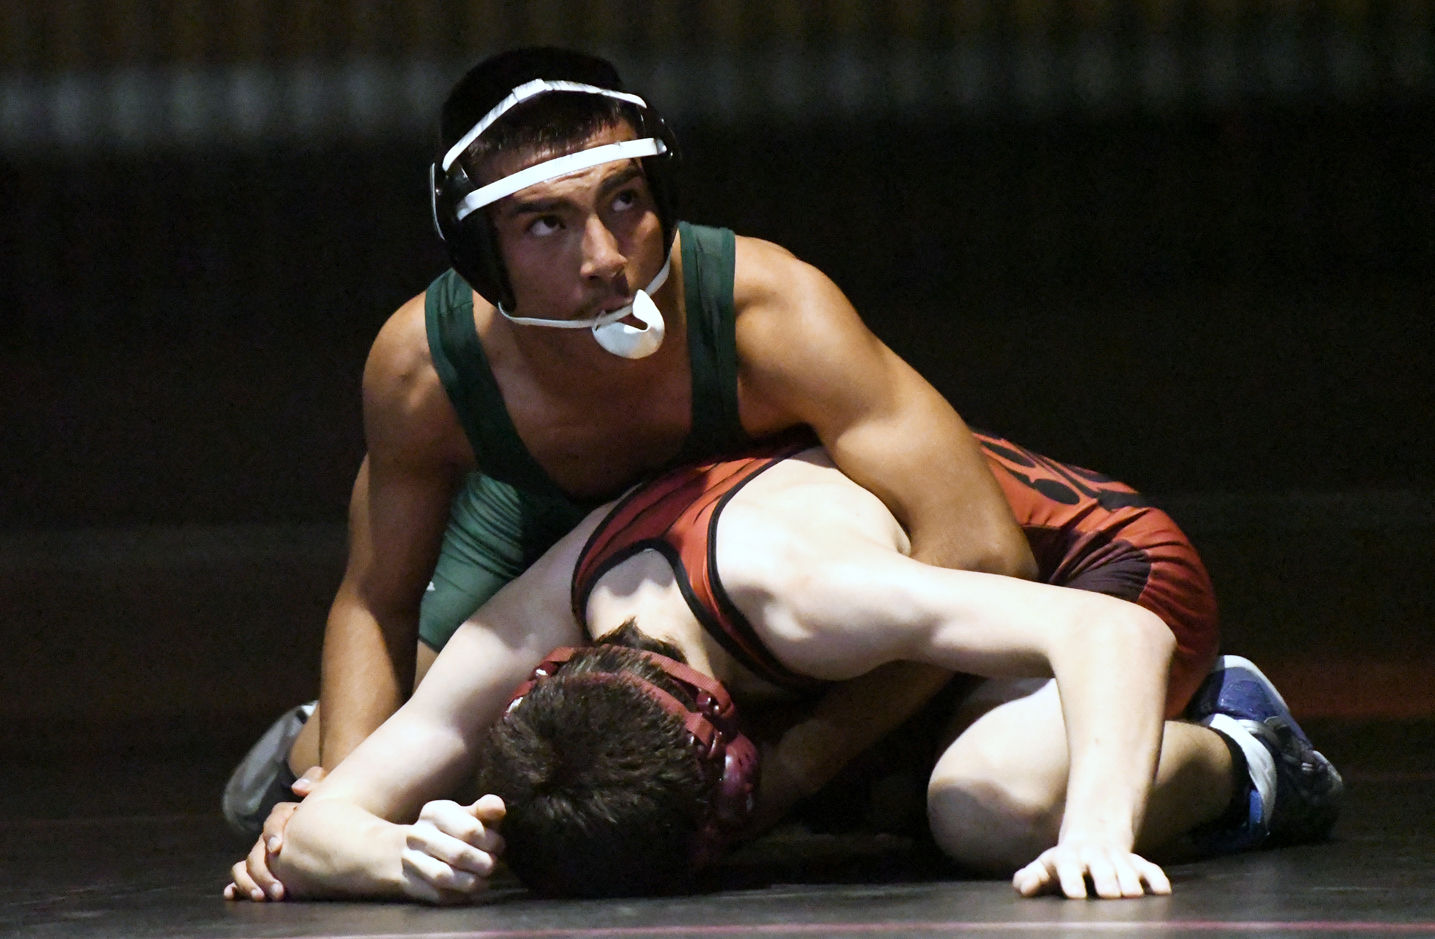 Boys Wrestling: Pins, forfeits give Grizzlies win, Sports